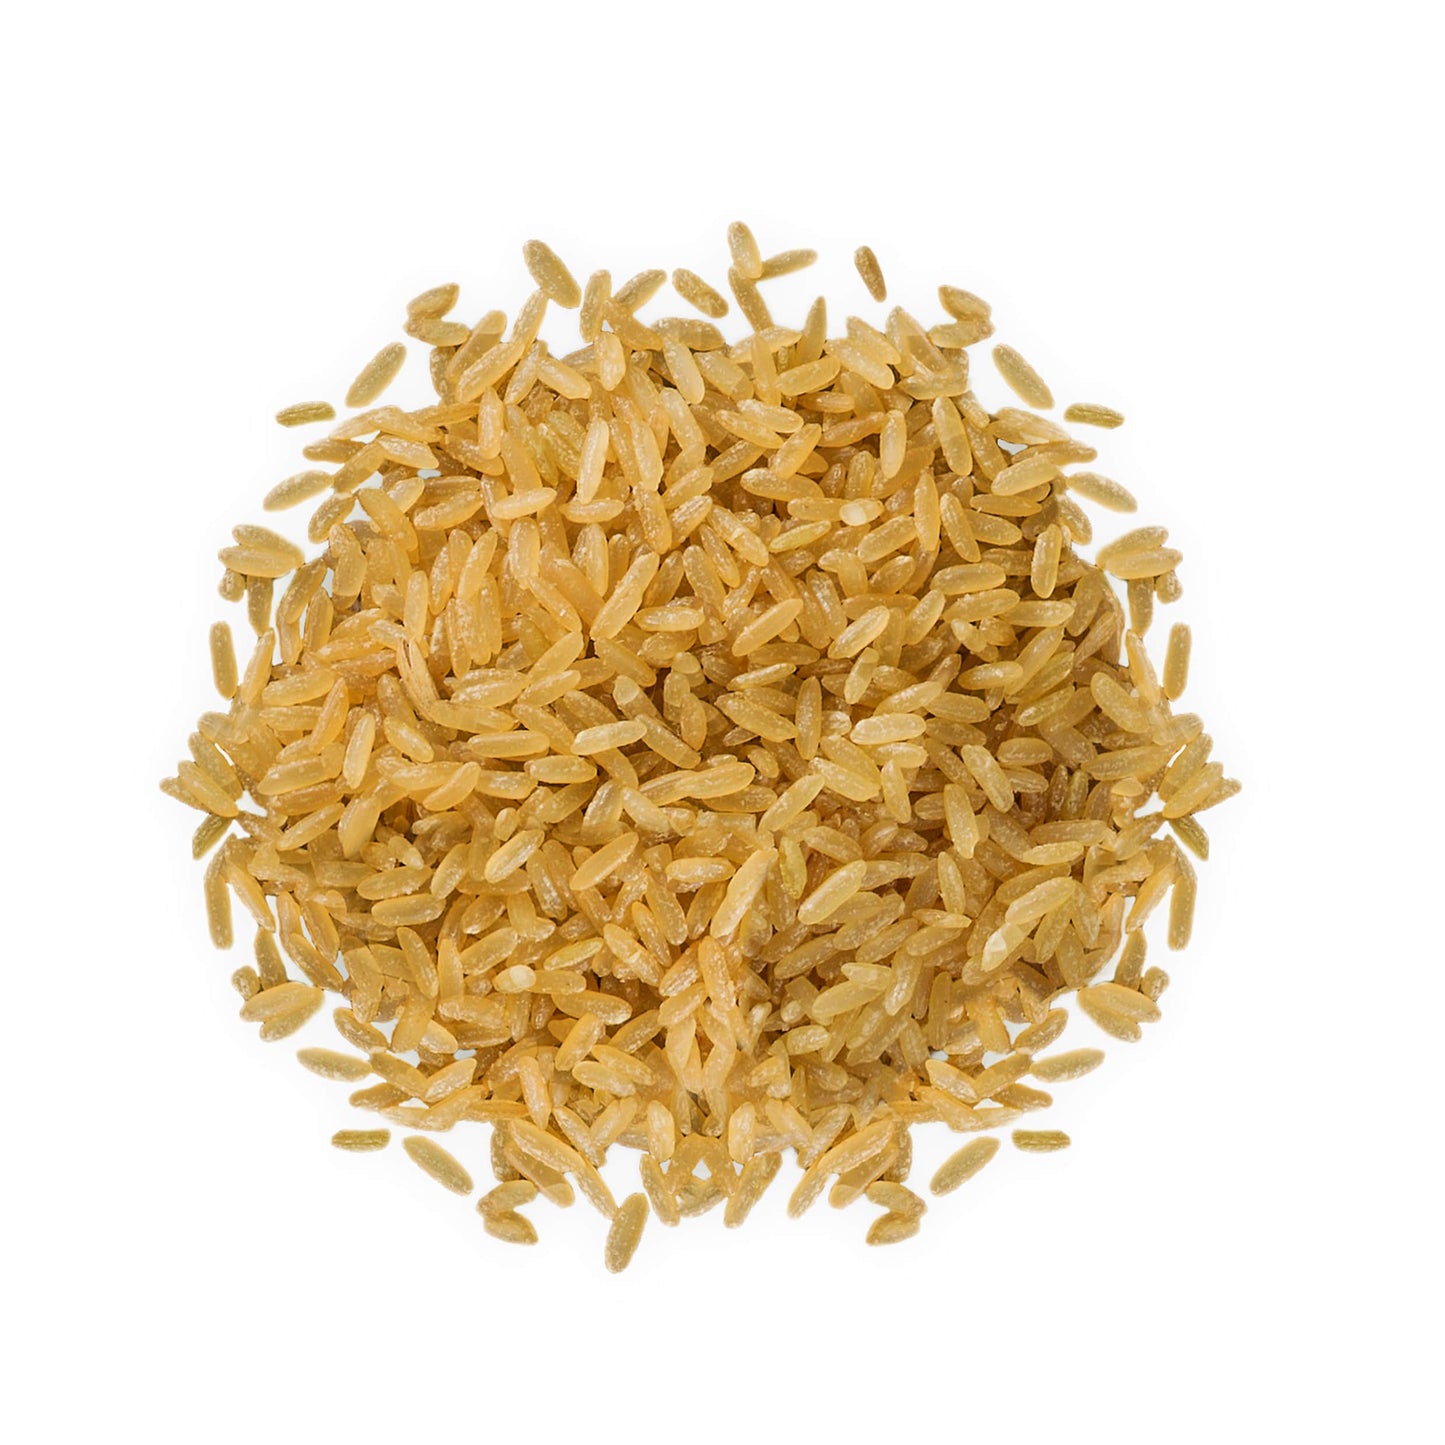 Parboiled Long Grain Brown Rice - Whole Grain, Kosher, Vegan, Bulk. Partially Precooked Converted Rice. Easy-cook Rice is Great for Making Idlis and Dosas. Rich in Vitamins and Minerals